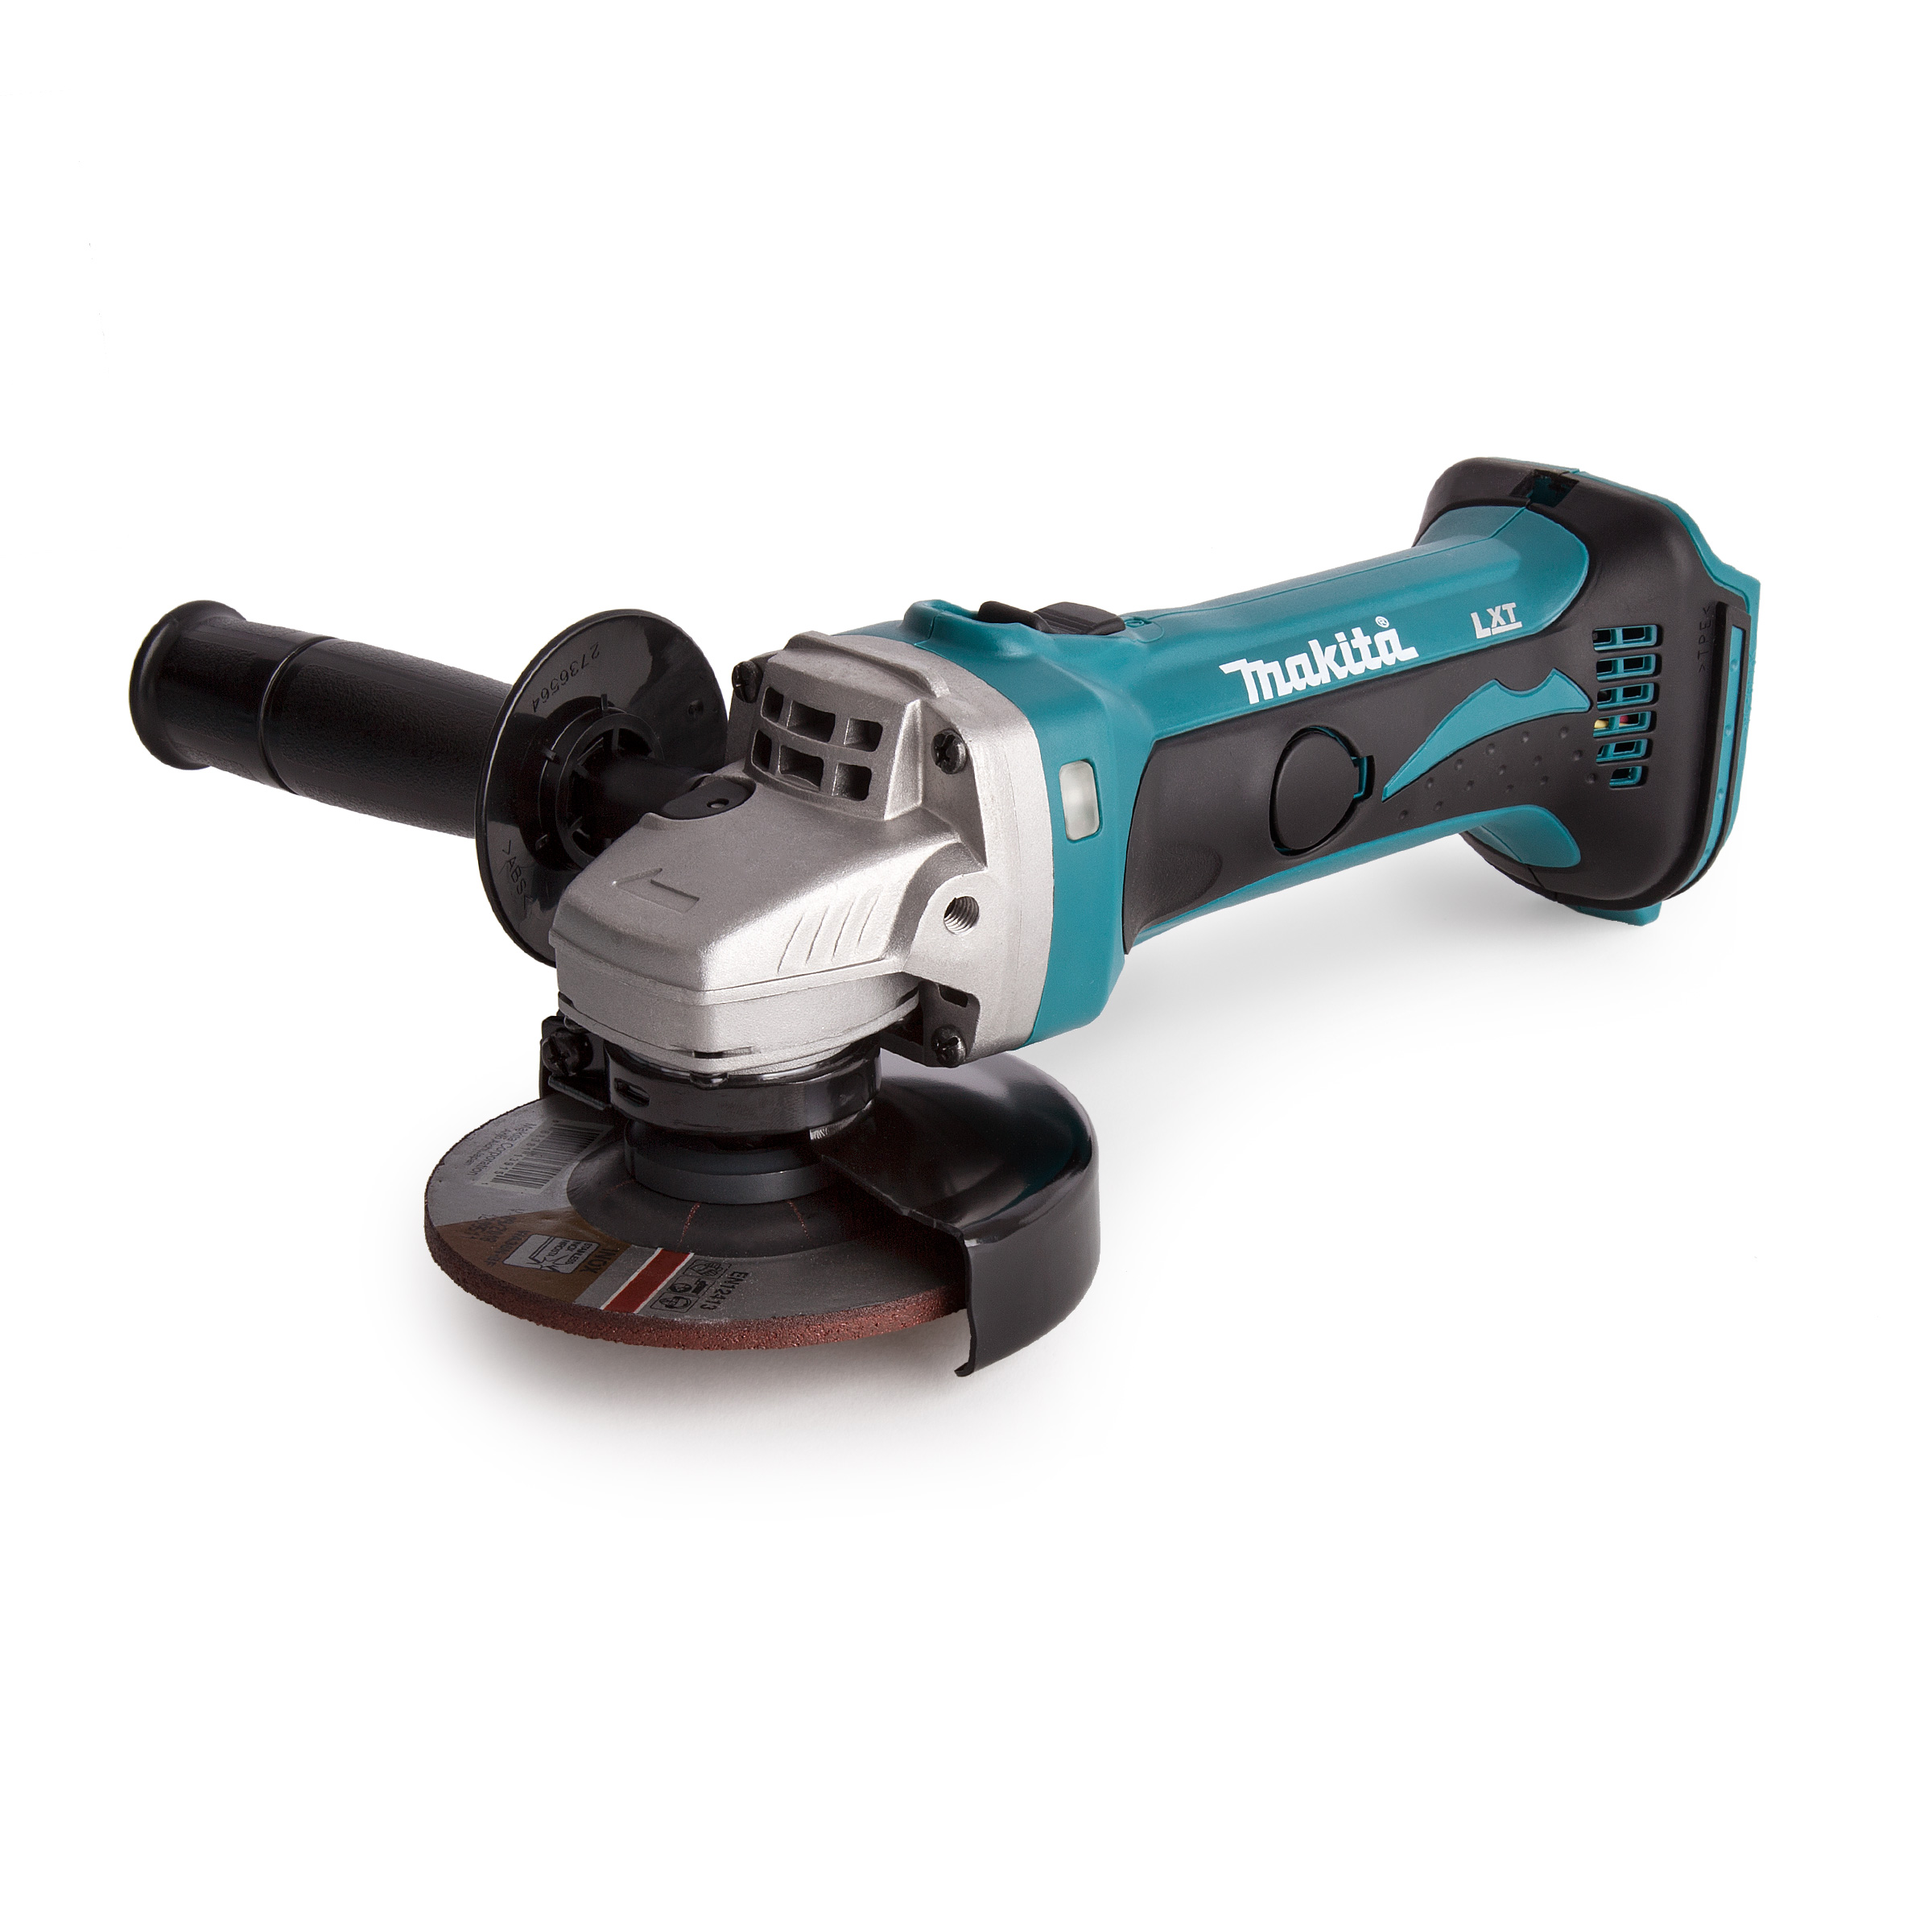 Makita body only tools